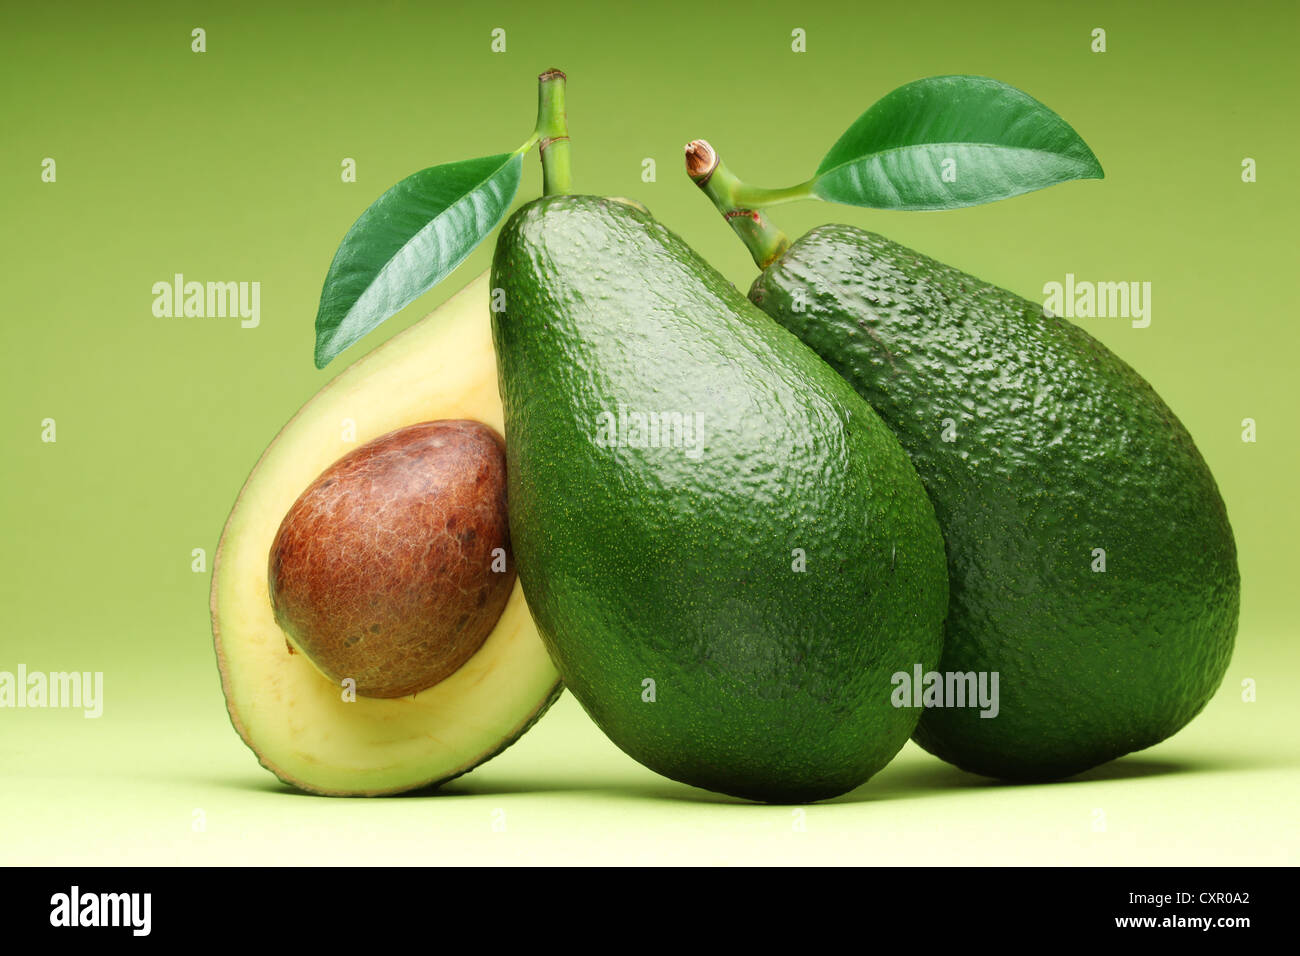 Avocado isolated on a green background. Stock Photo